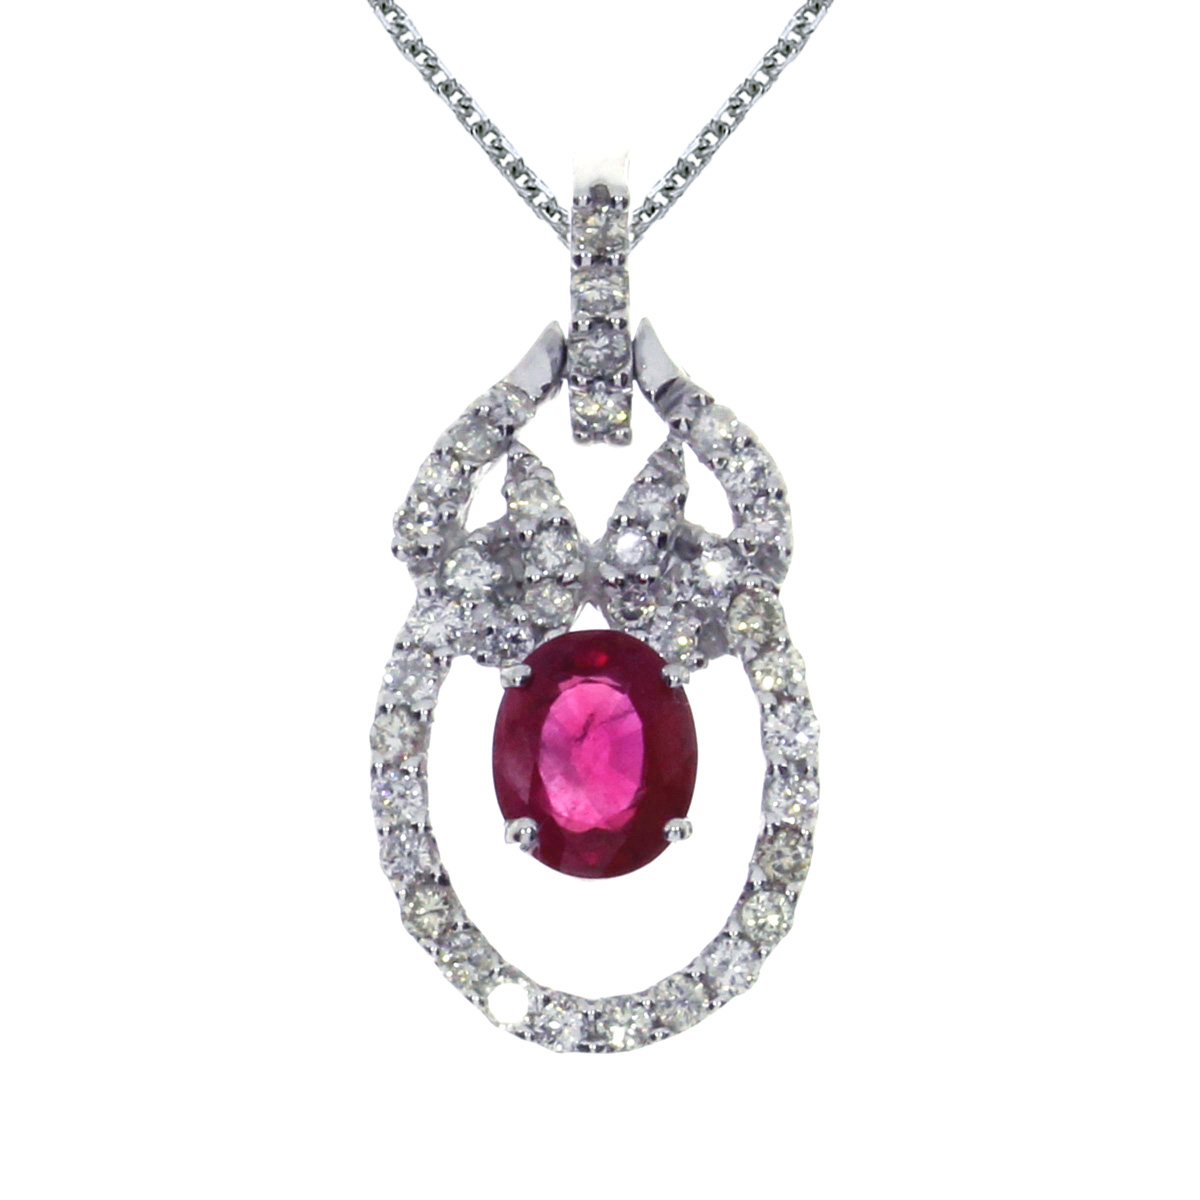 JCX2632: This beautiful 14k white gold pendant contains a stunning 6x5 mm oval ruby and .23 carats of diamonds all in a fashionable design.